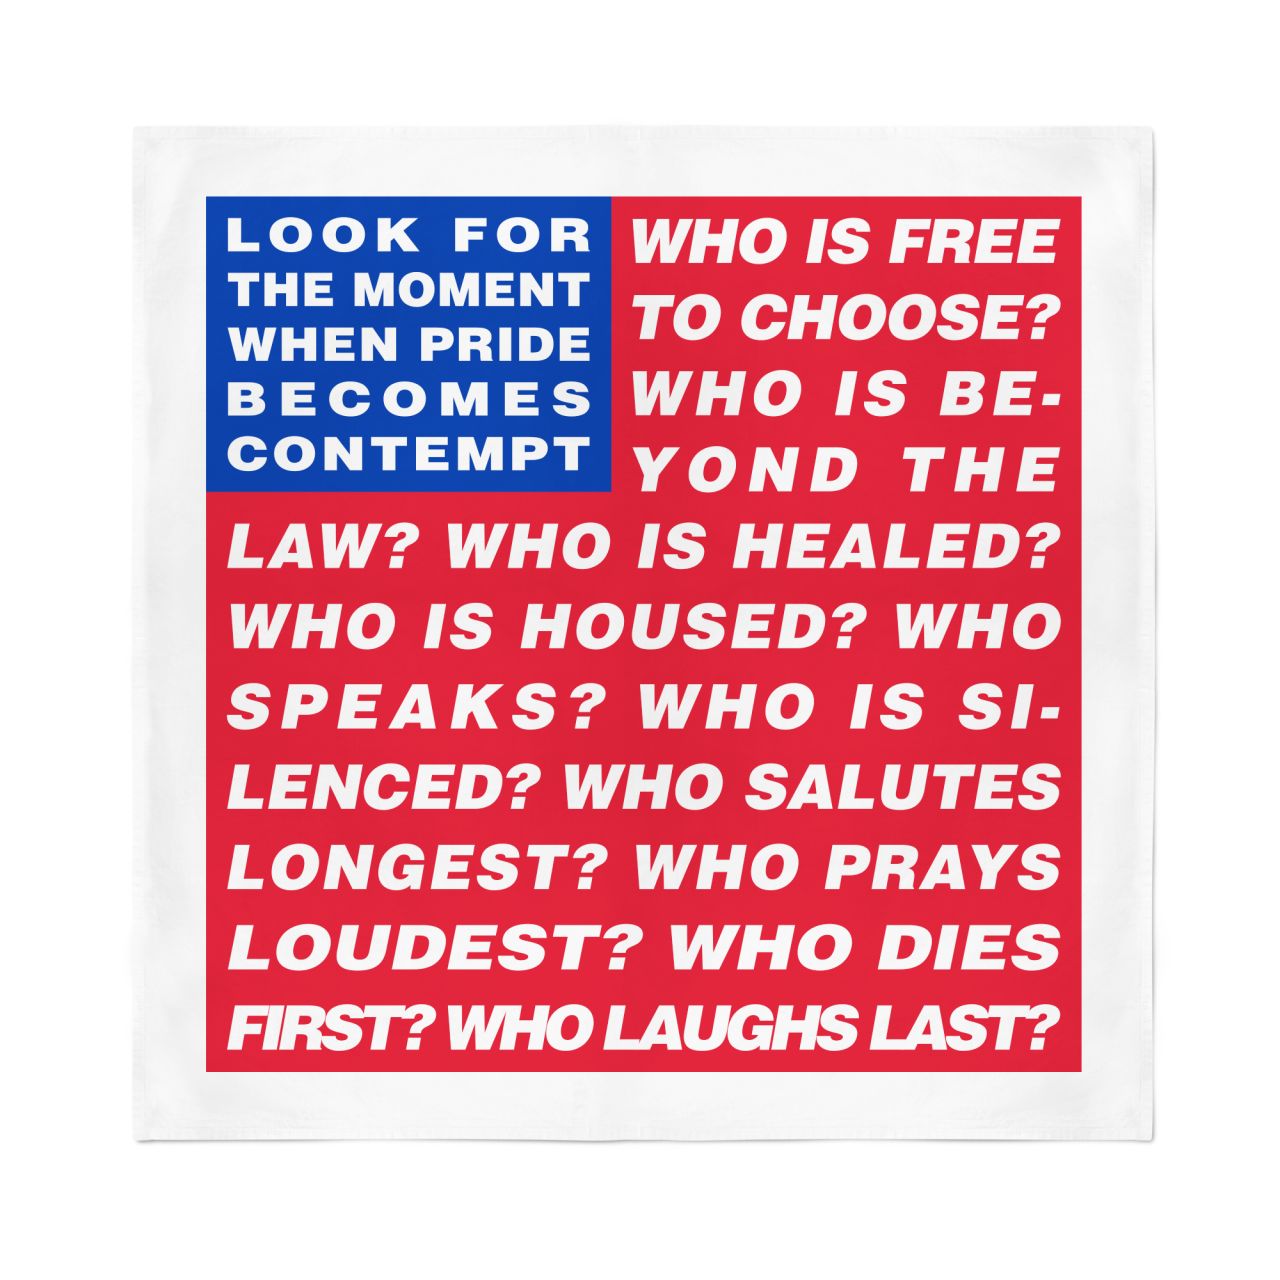 Barbara Kruger's bandana design incorporates her text-based style that asks viewers to interogate political systems.